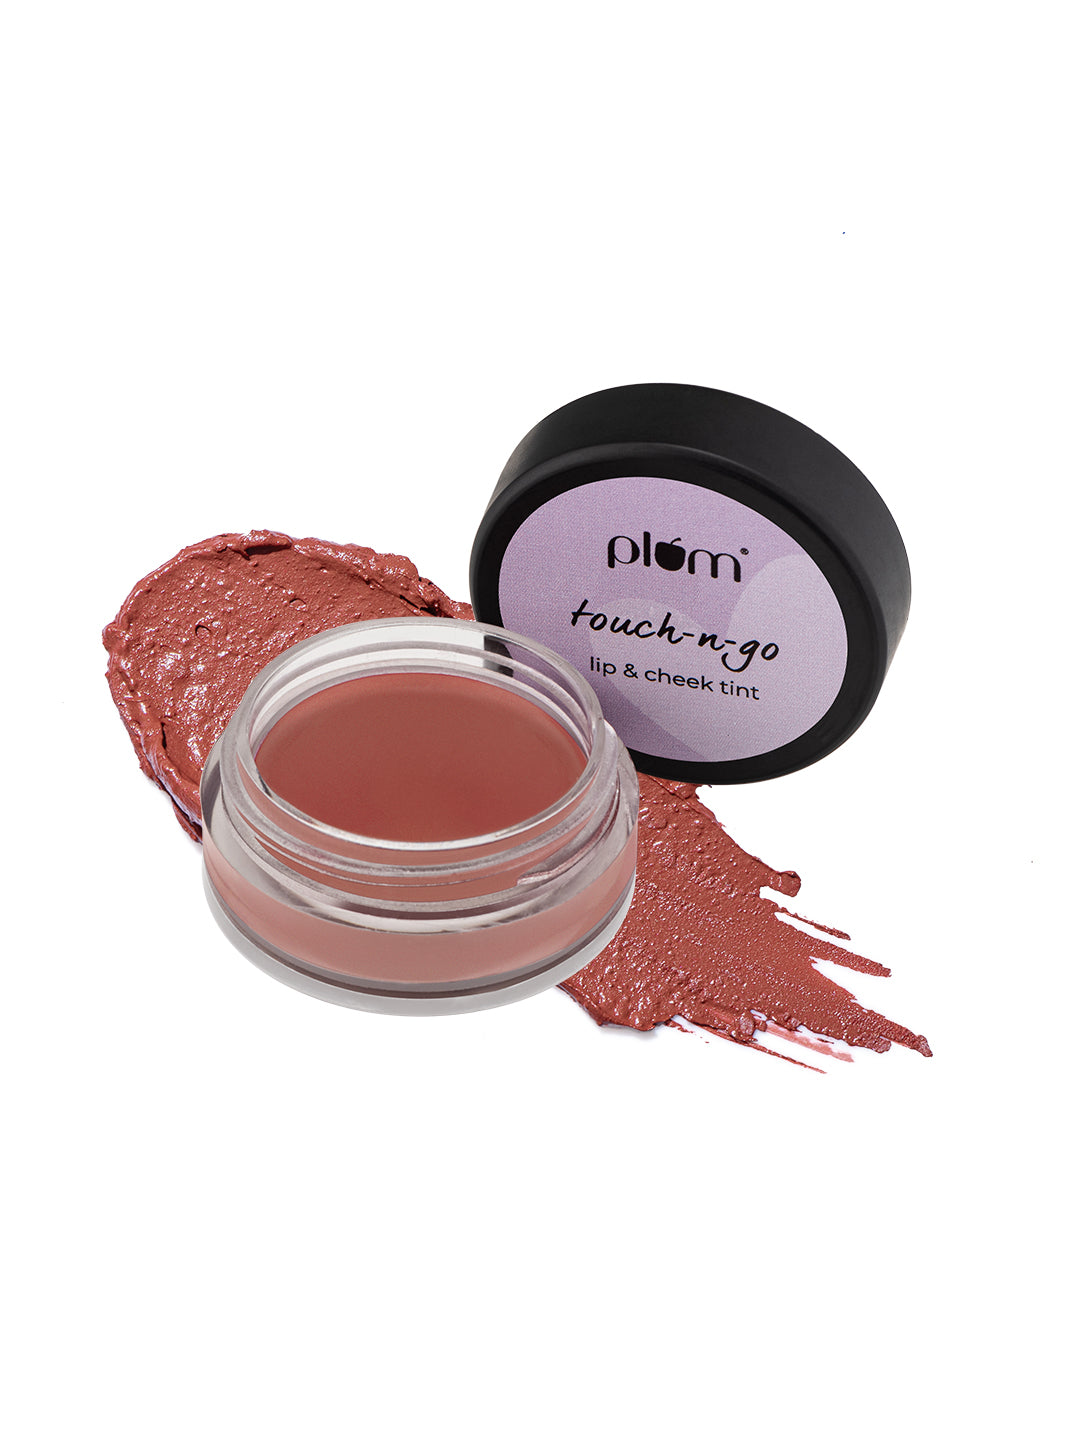 Plum Touch-N-Go Lip & Cheek Tint | Highly Pigmented | Effortless Blending | Bare It Is - 121 (Soft Nude) | 5ml